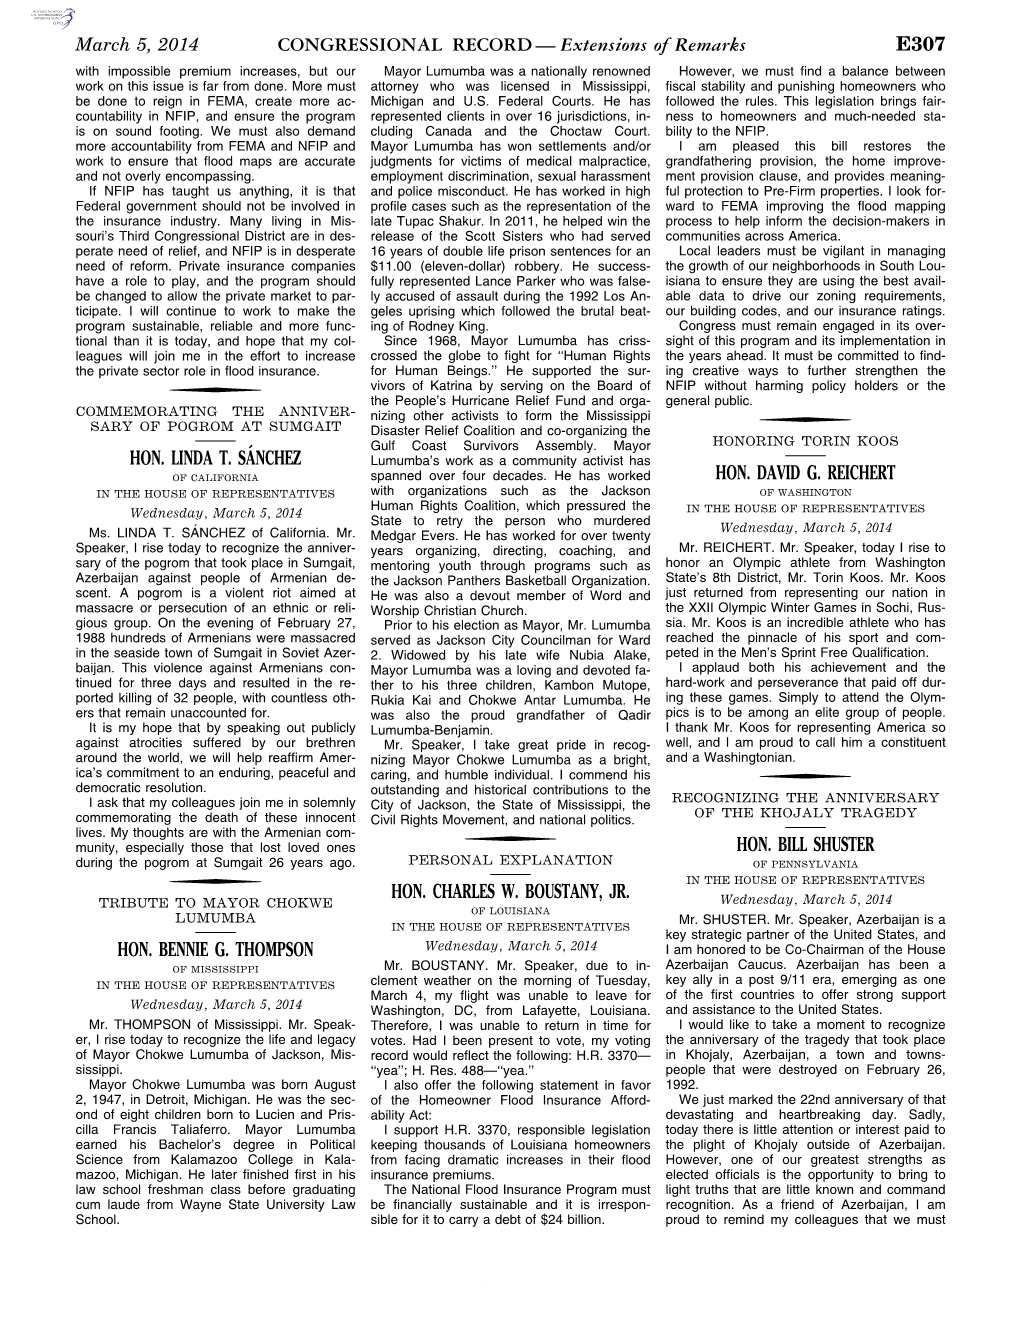 CONGRESSIONAL RECORD— Extensions of Remarks E307 HON